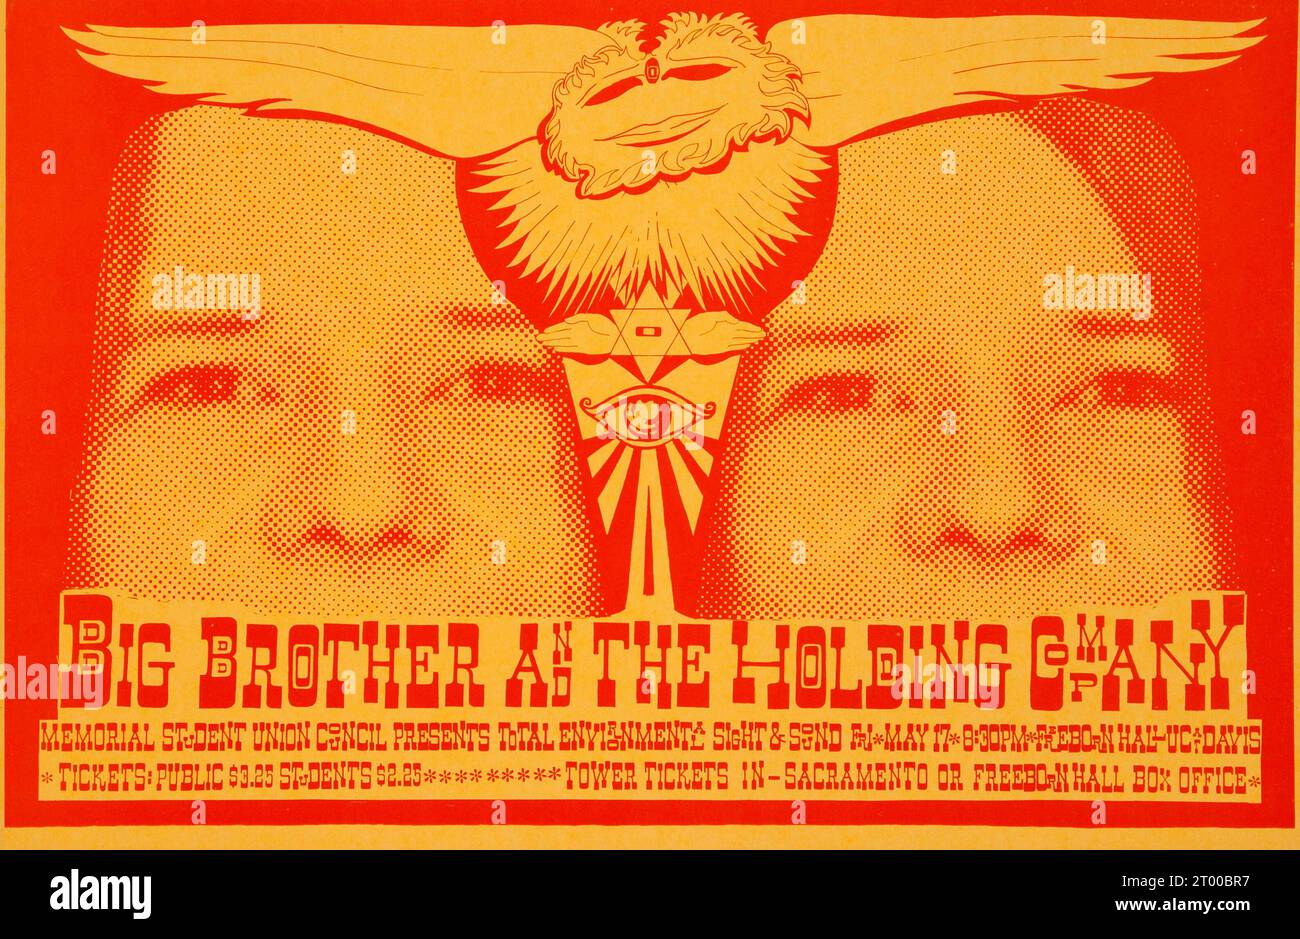 Janis Joplin - Big Brother and the Holding Company Freeborn Hall Concert poster (Memorial Student Union Council, 1968) Foto Stock